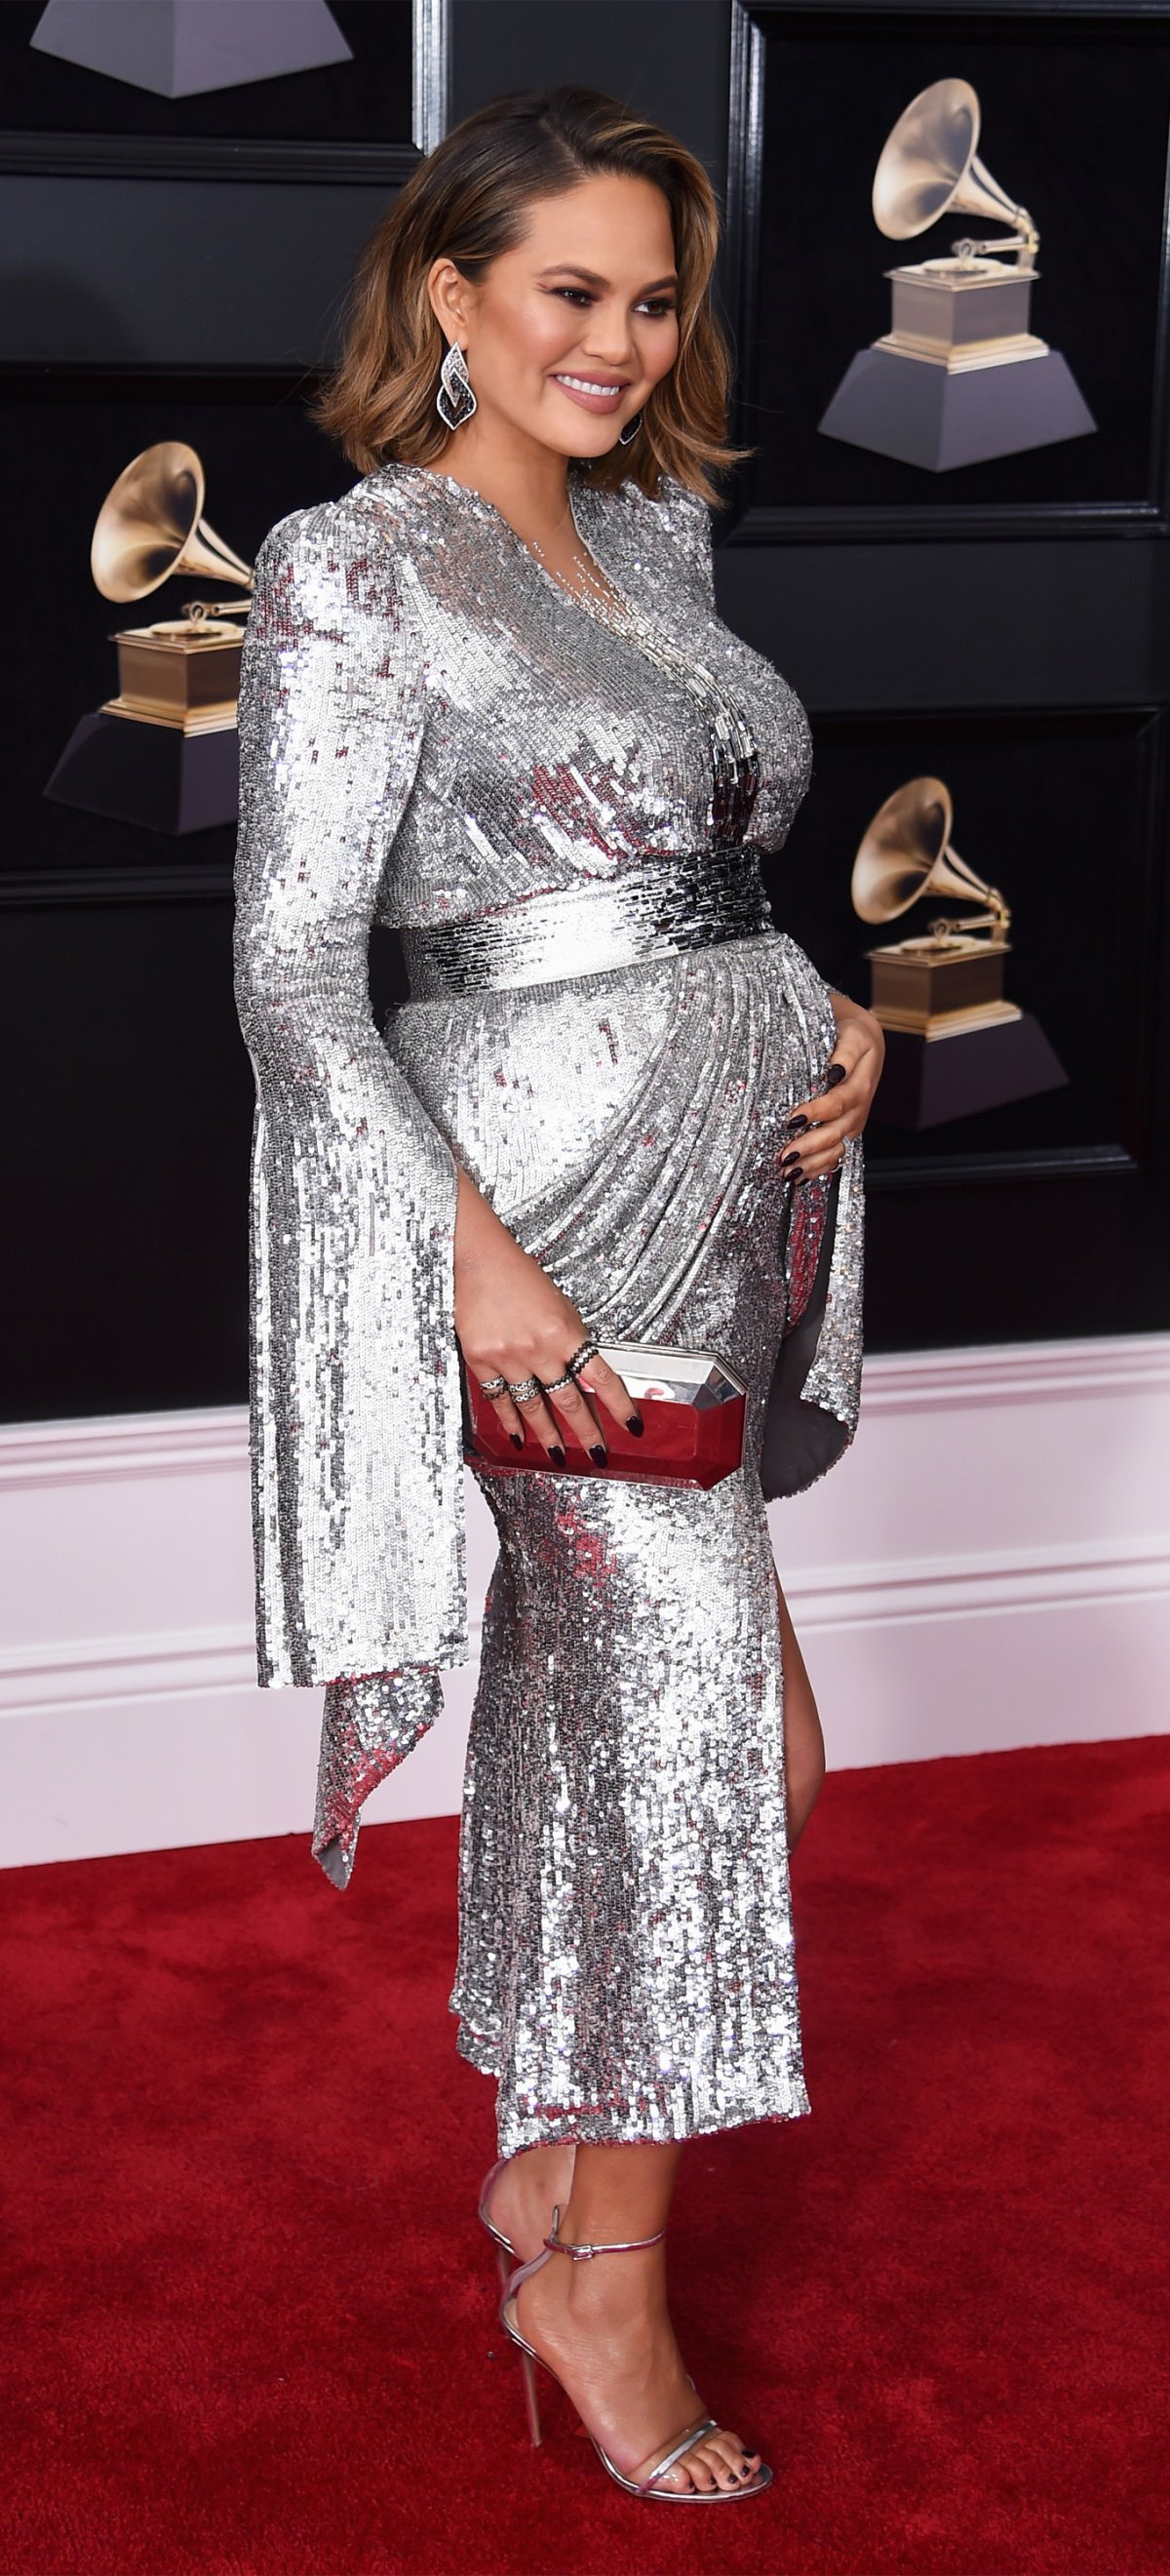 Grammys 2018 Red Carpet Photos: See Your Favorite Stars